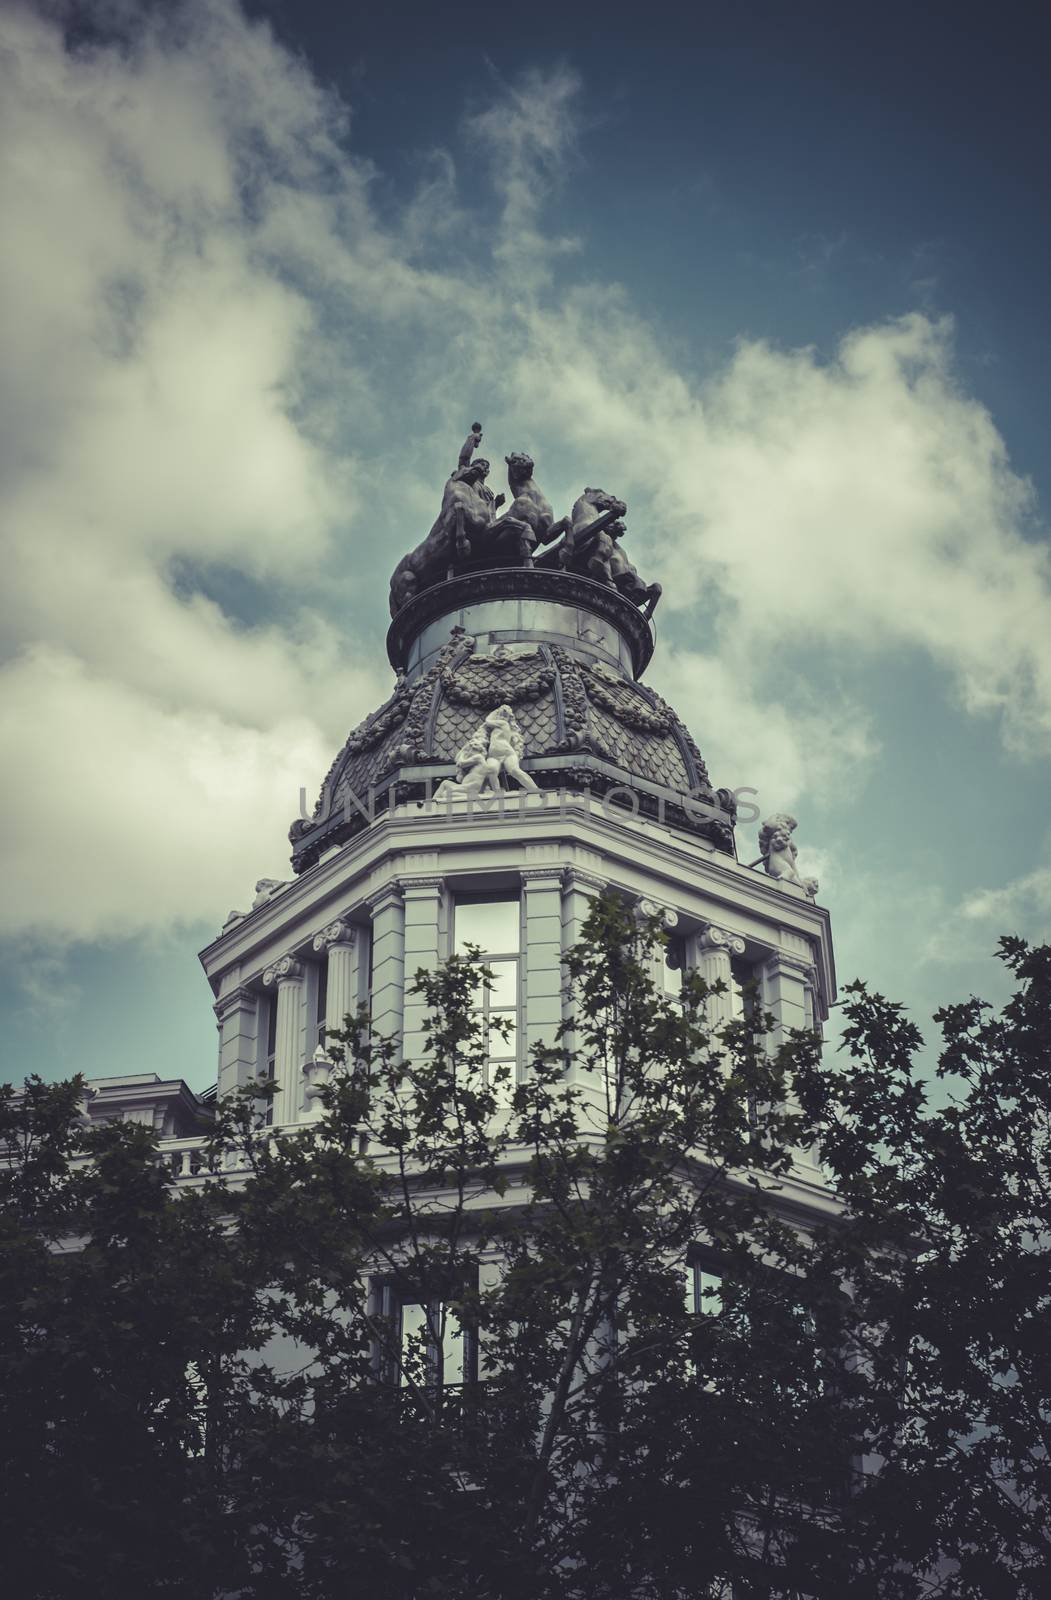 Gran via, Image of the city of Madrid, its characteristic architecture